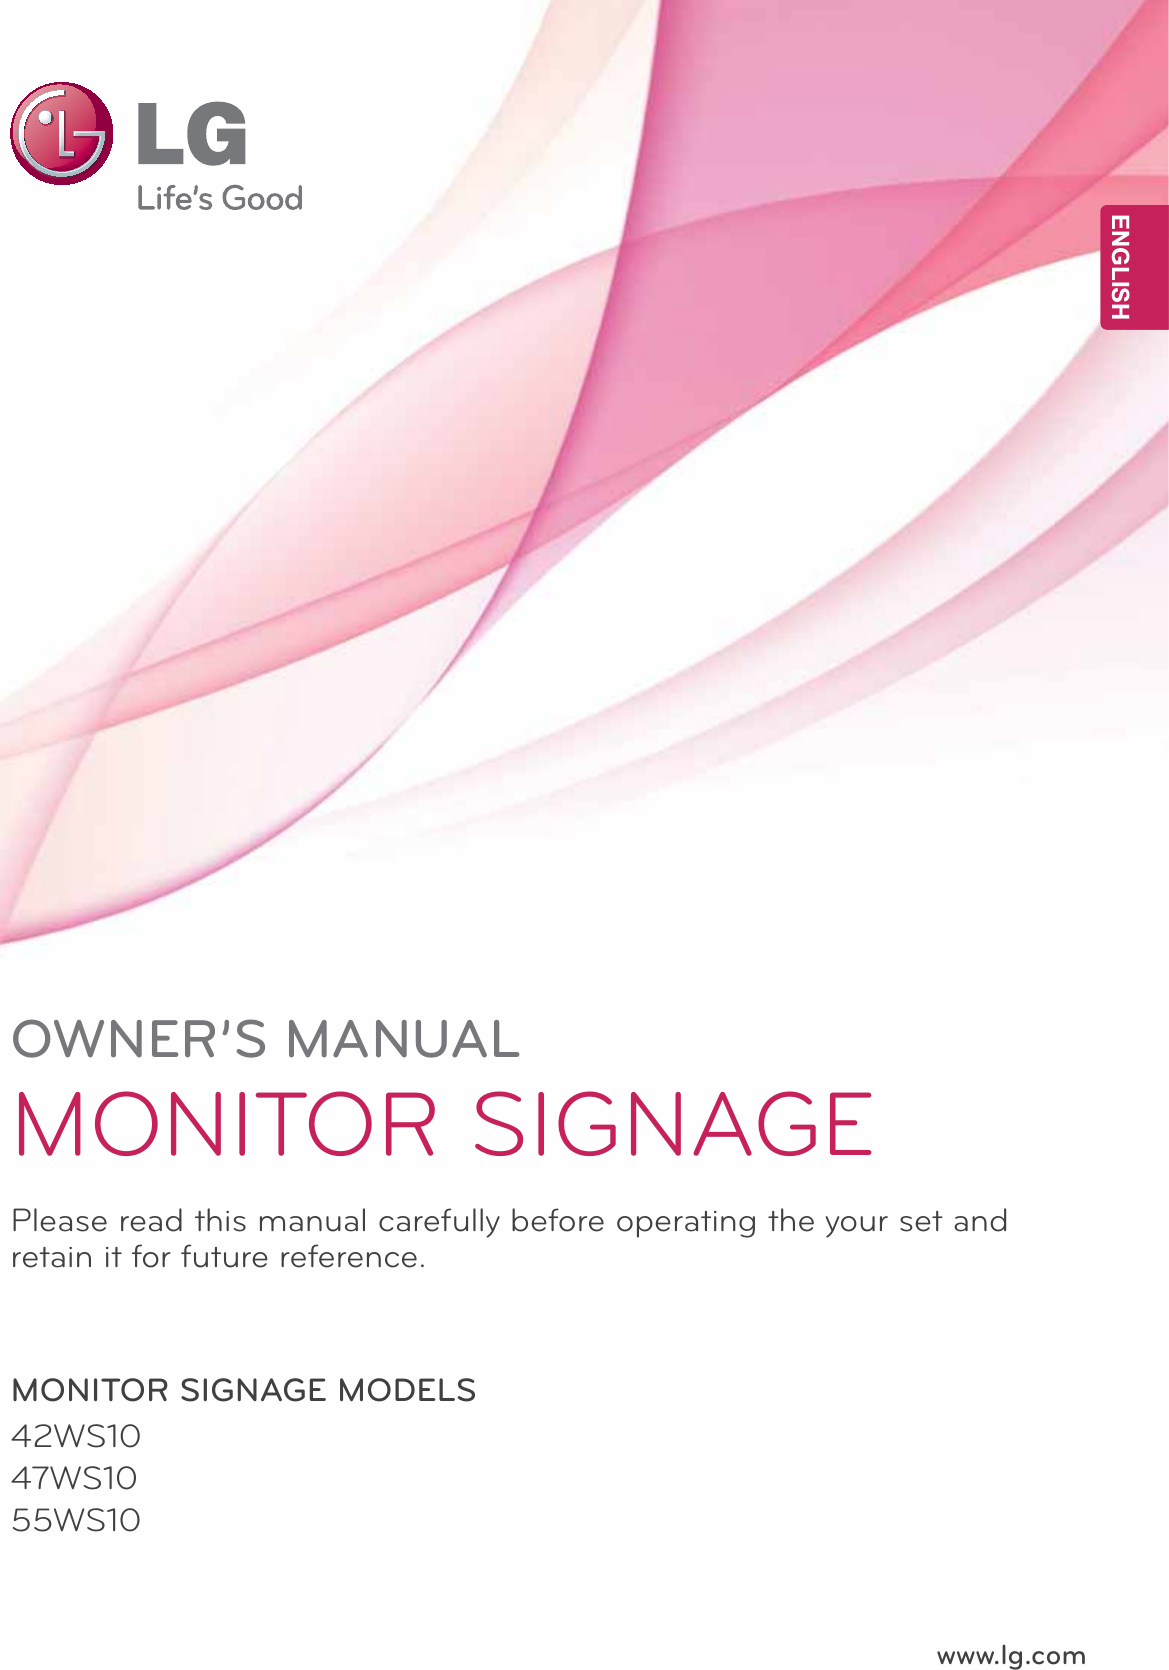 www.lg.comOWNER’S MANUALMONITOR SIGNAGE 42WS1047WS1055WS10Please read this manual carefully before operating the your set and retain it for future reference.MONITOR SIGNAGE MODELS